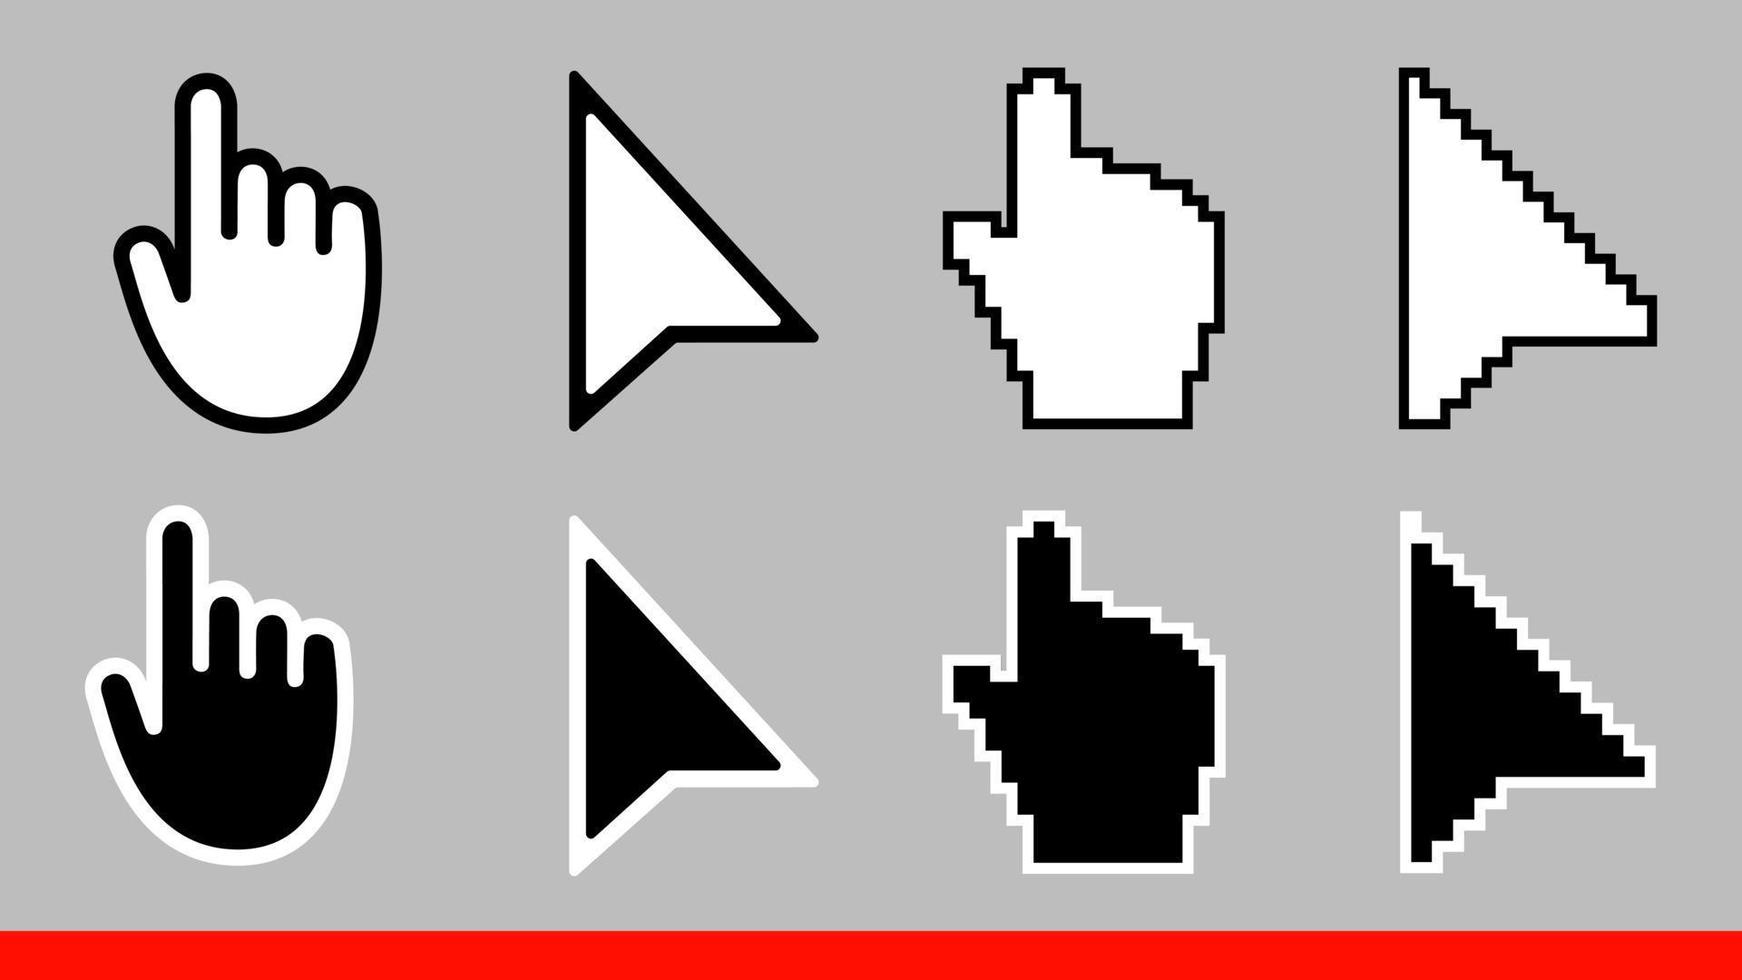 8 Black and white arrow pixel and no pixel mouse hand cursors icon vector illustration set flat style design isolated on white background.